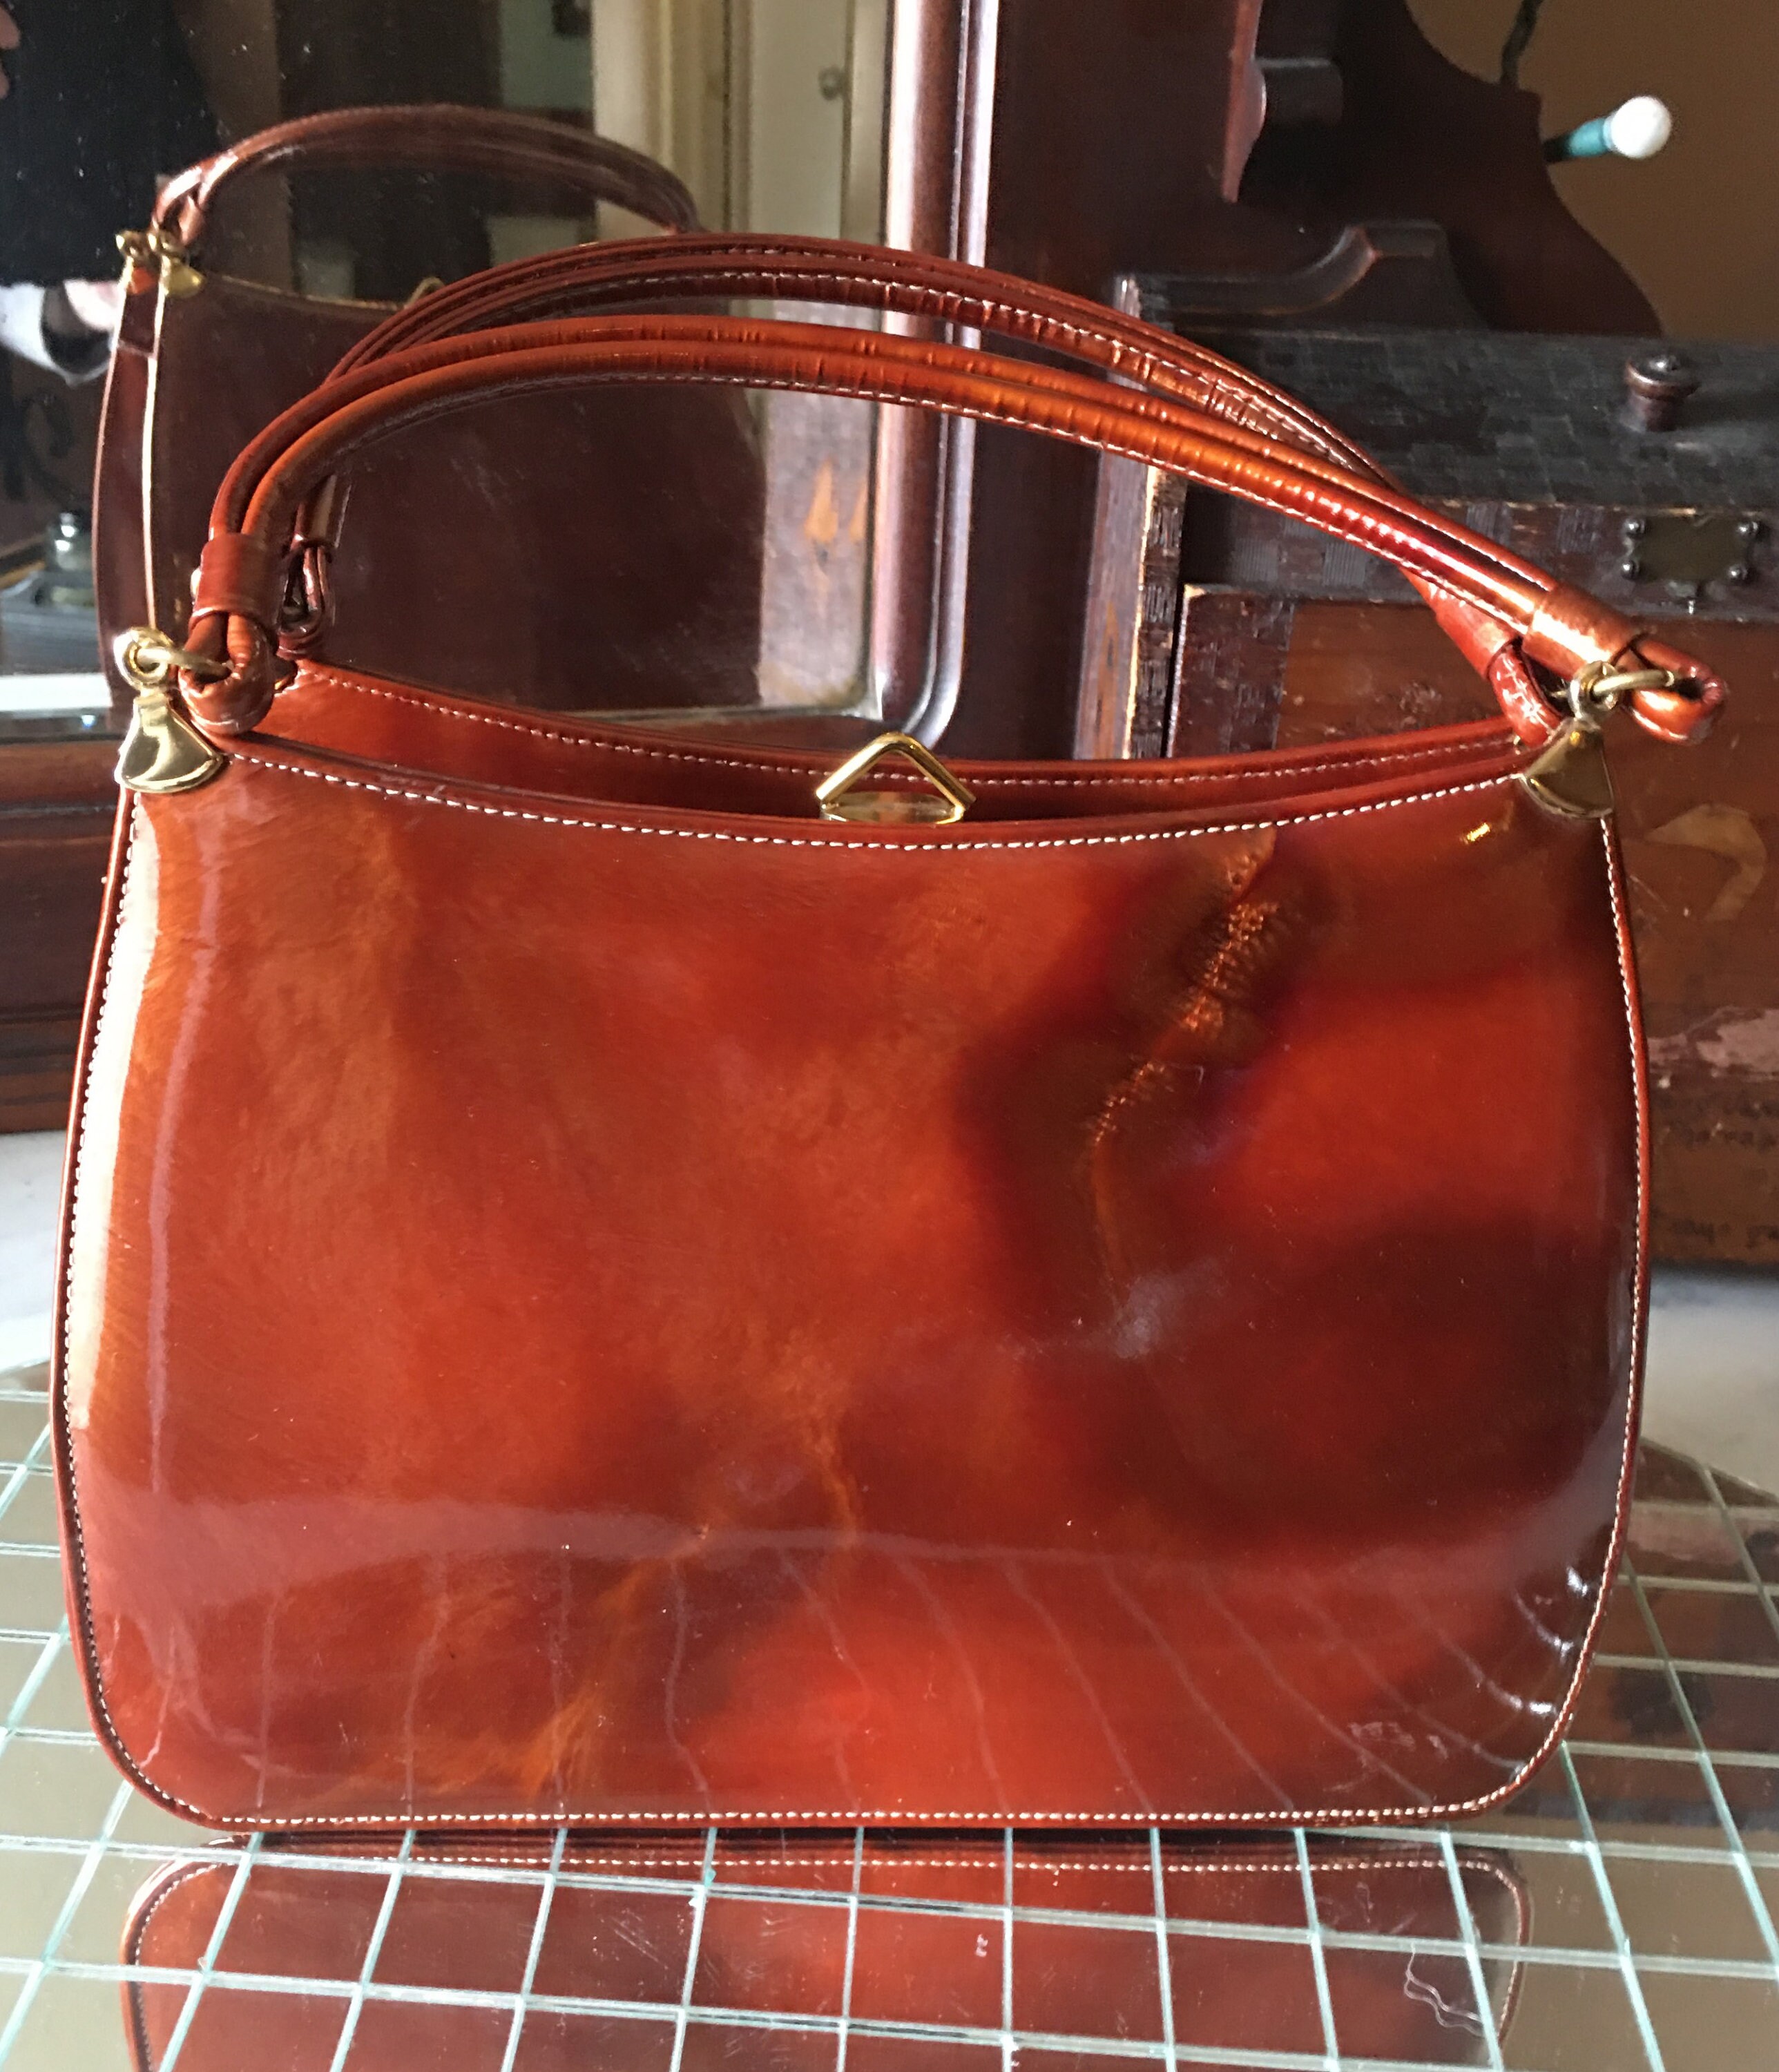 Louis Vuitton - Authenticated Bréa Handbag - Patent Leather Red for Women, Good Condition